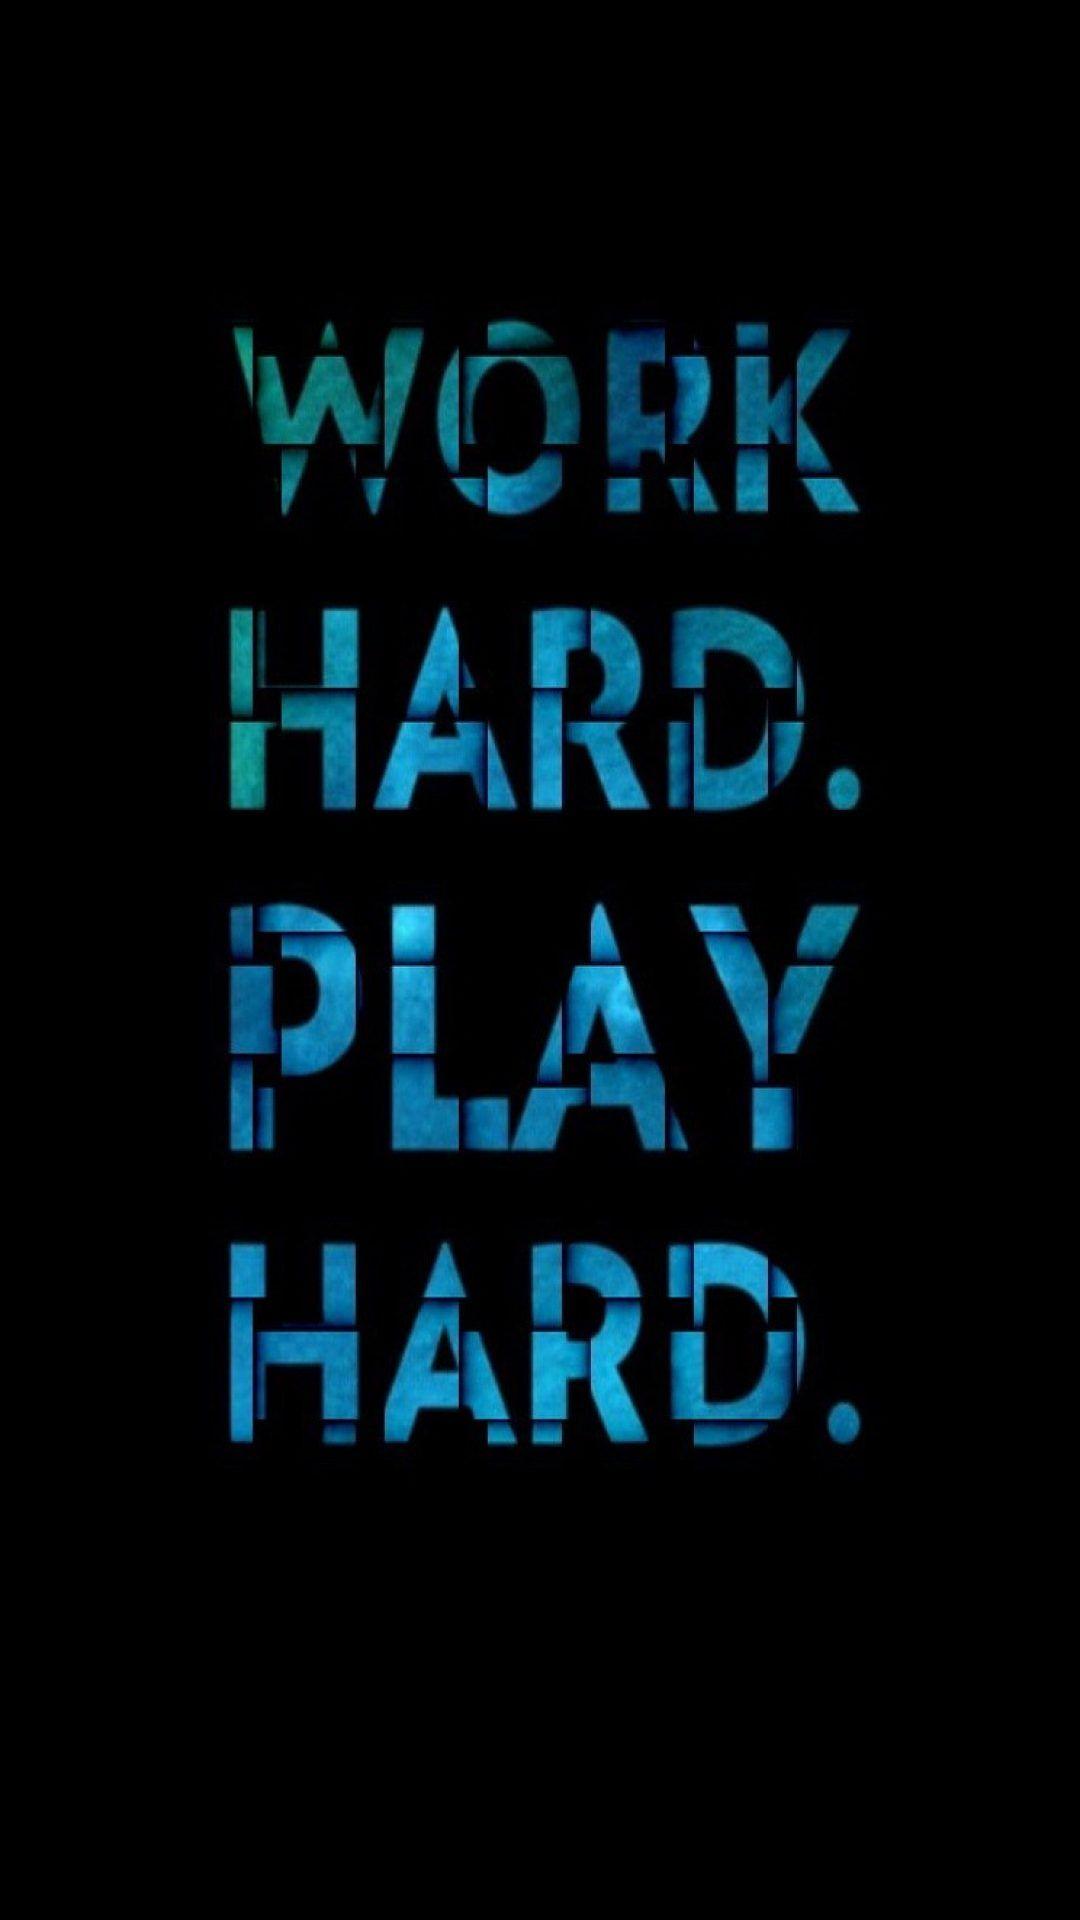 Inspirational Quotes Wallpaper for Mobile (6 of 20) Hard Play Hard Wallpaper. Wallpaper Download. High Resolution Wallpaper. Inspirational quotes wallpaper, Quotes wallpaper for mobile, Inspirational quotes